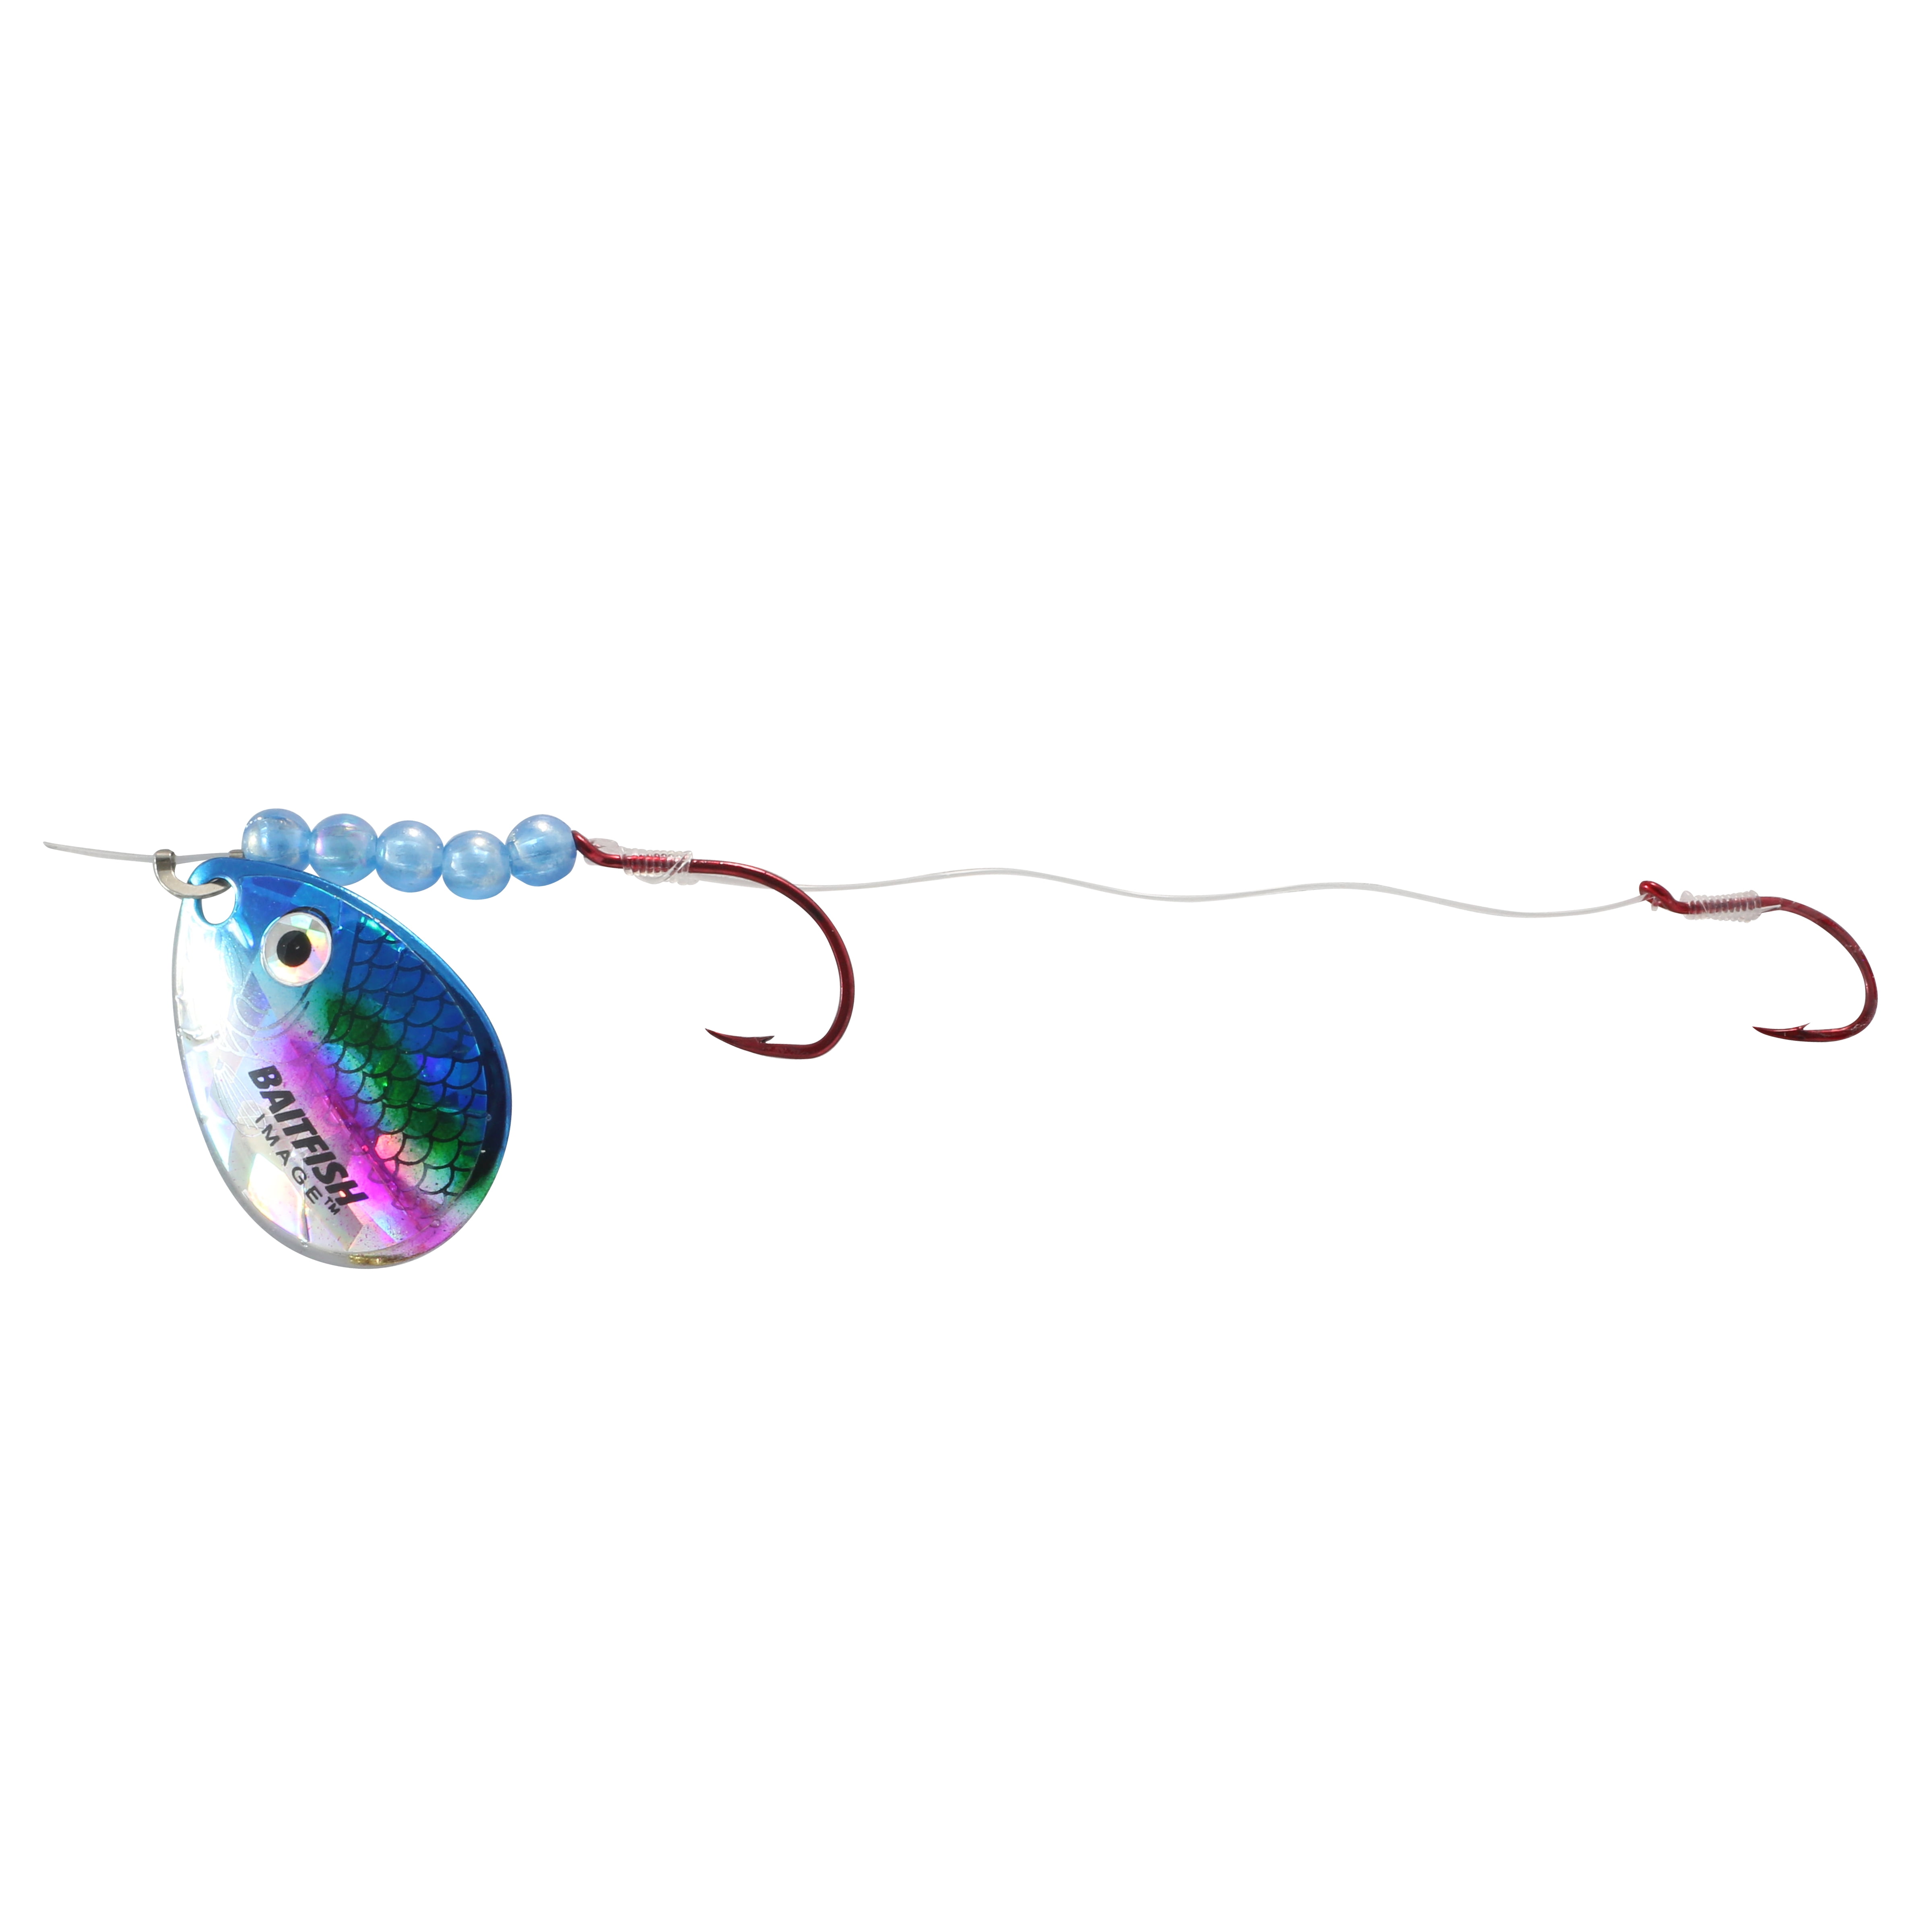 Northland Tackle RCH4-RB Rainbow 60 Snell Hook Baitfish Harness Rig 